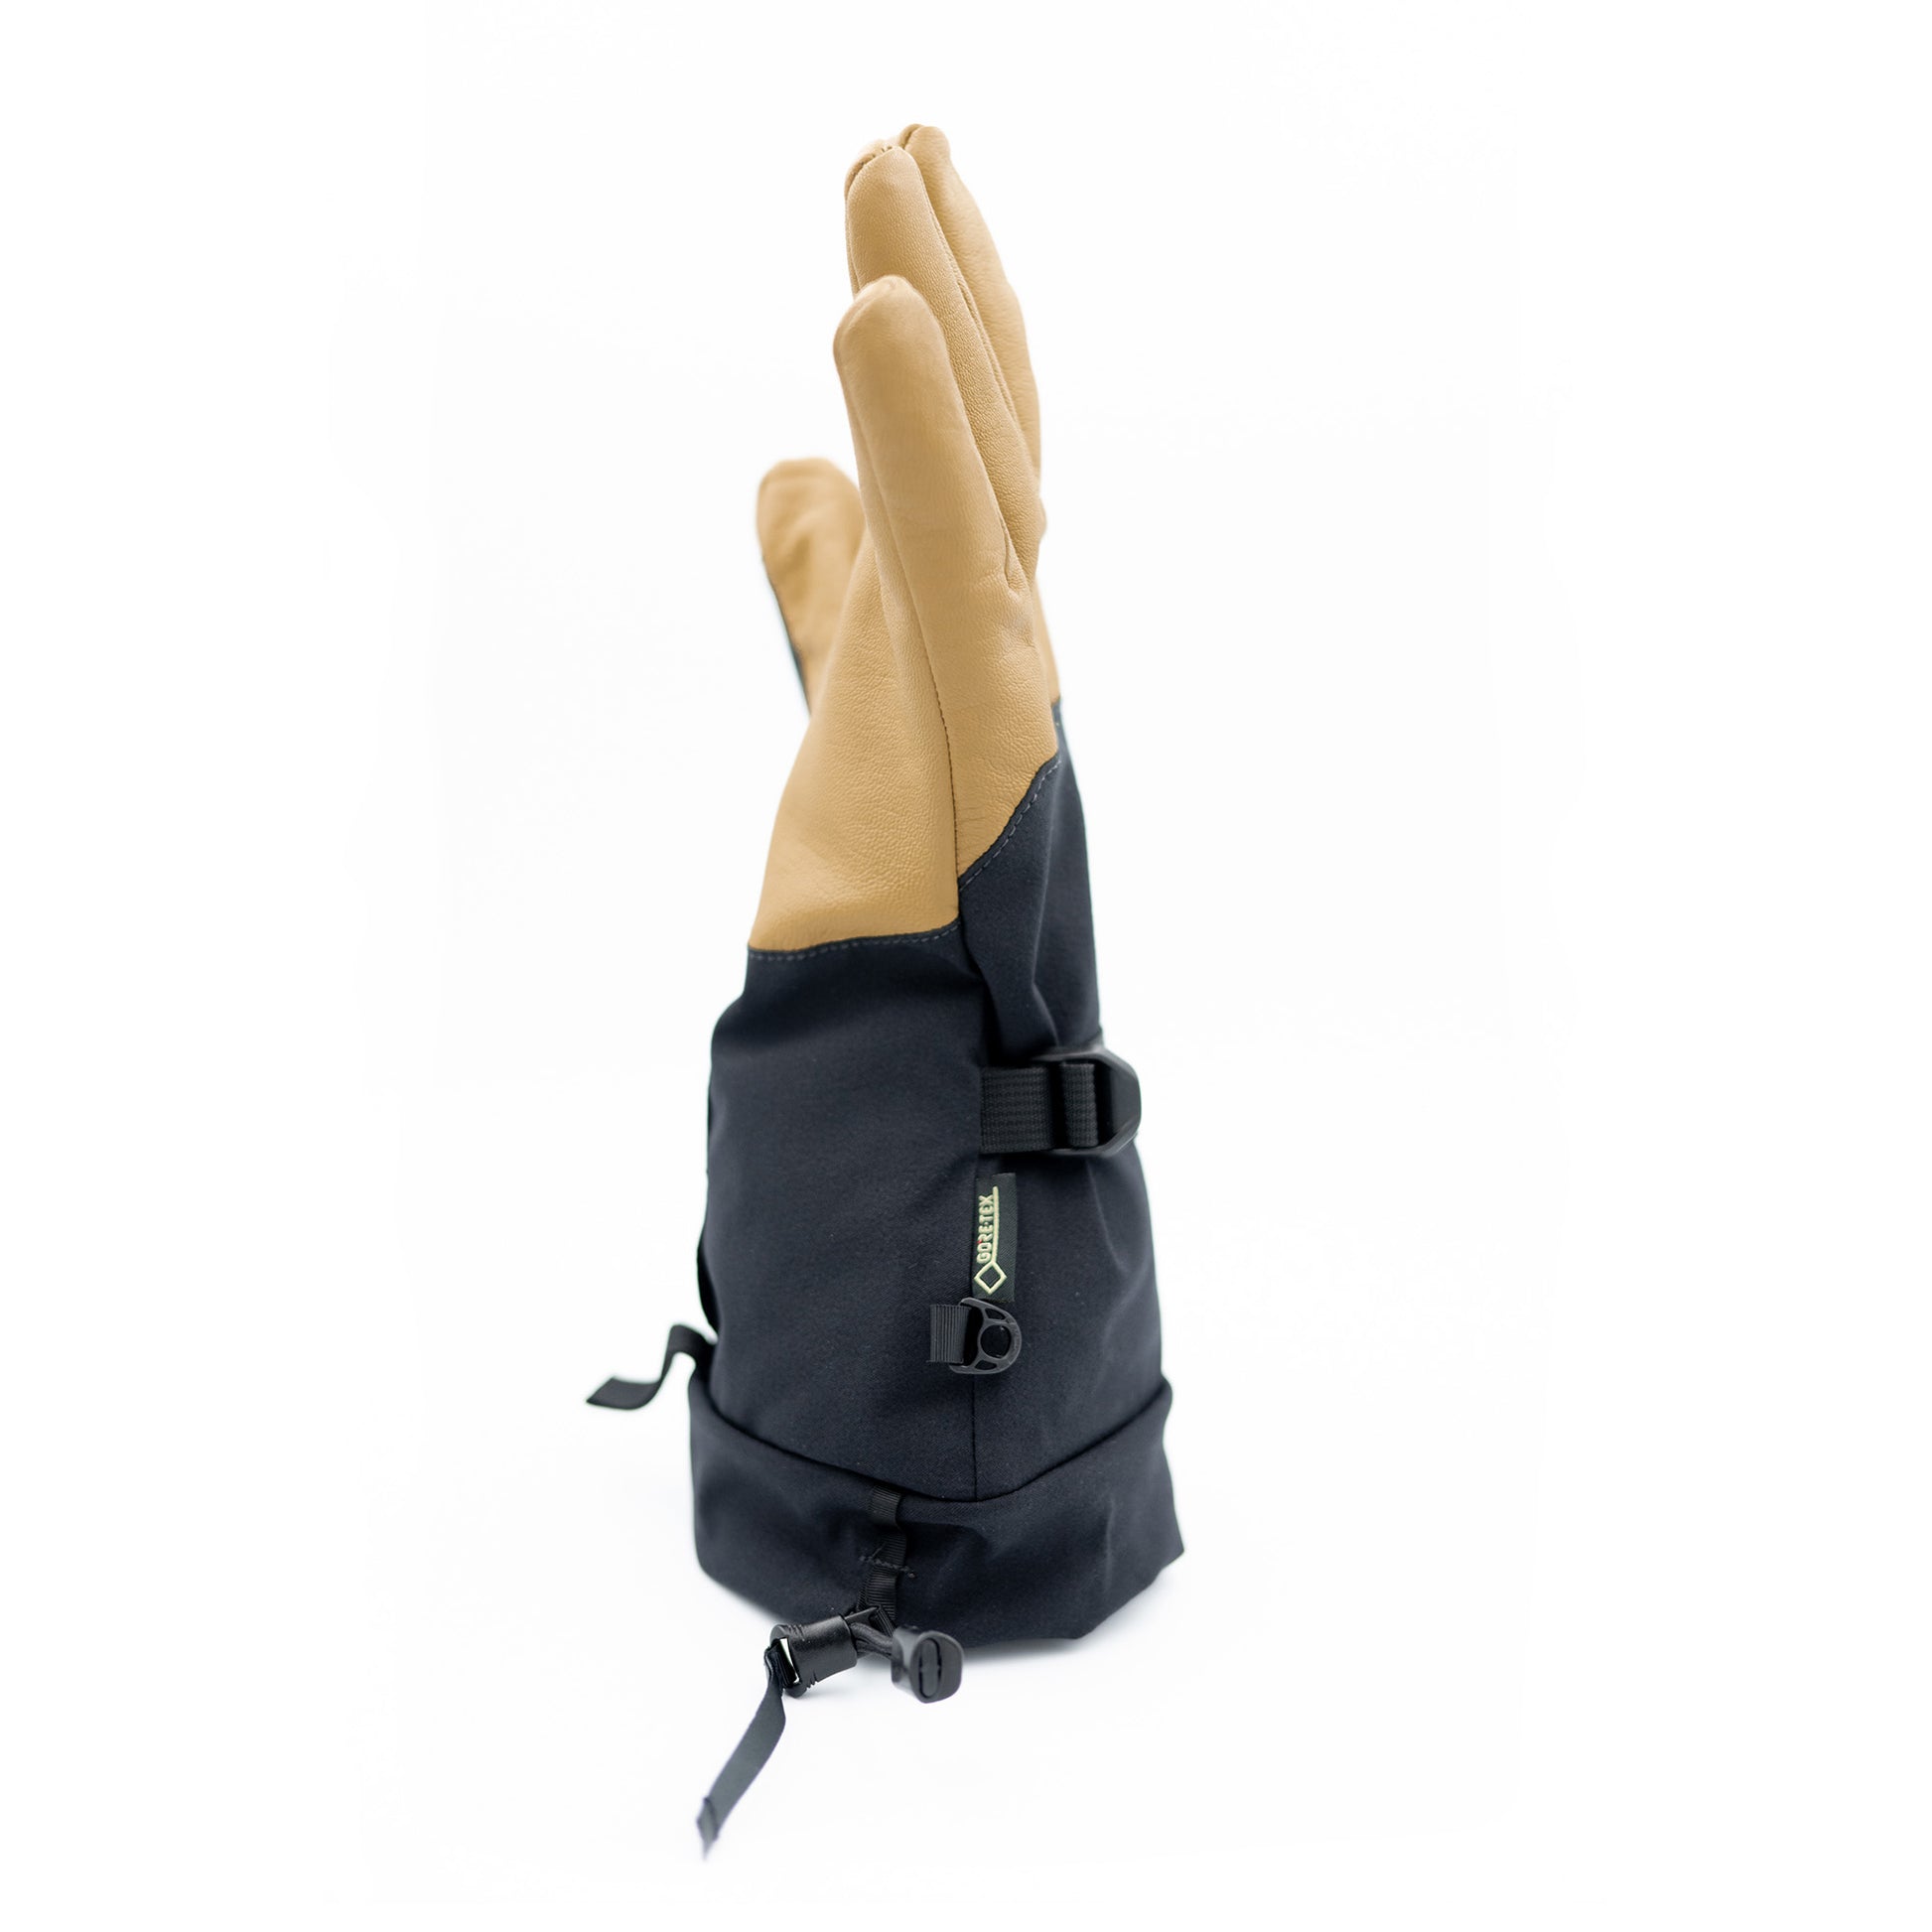 A black and tan Mainers Rangeley Glove on a white background.